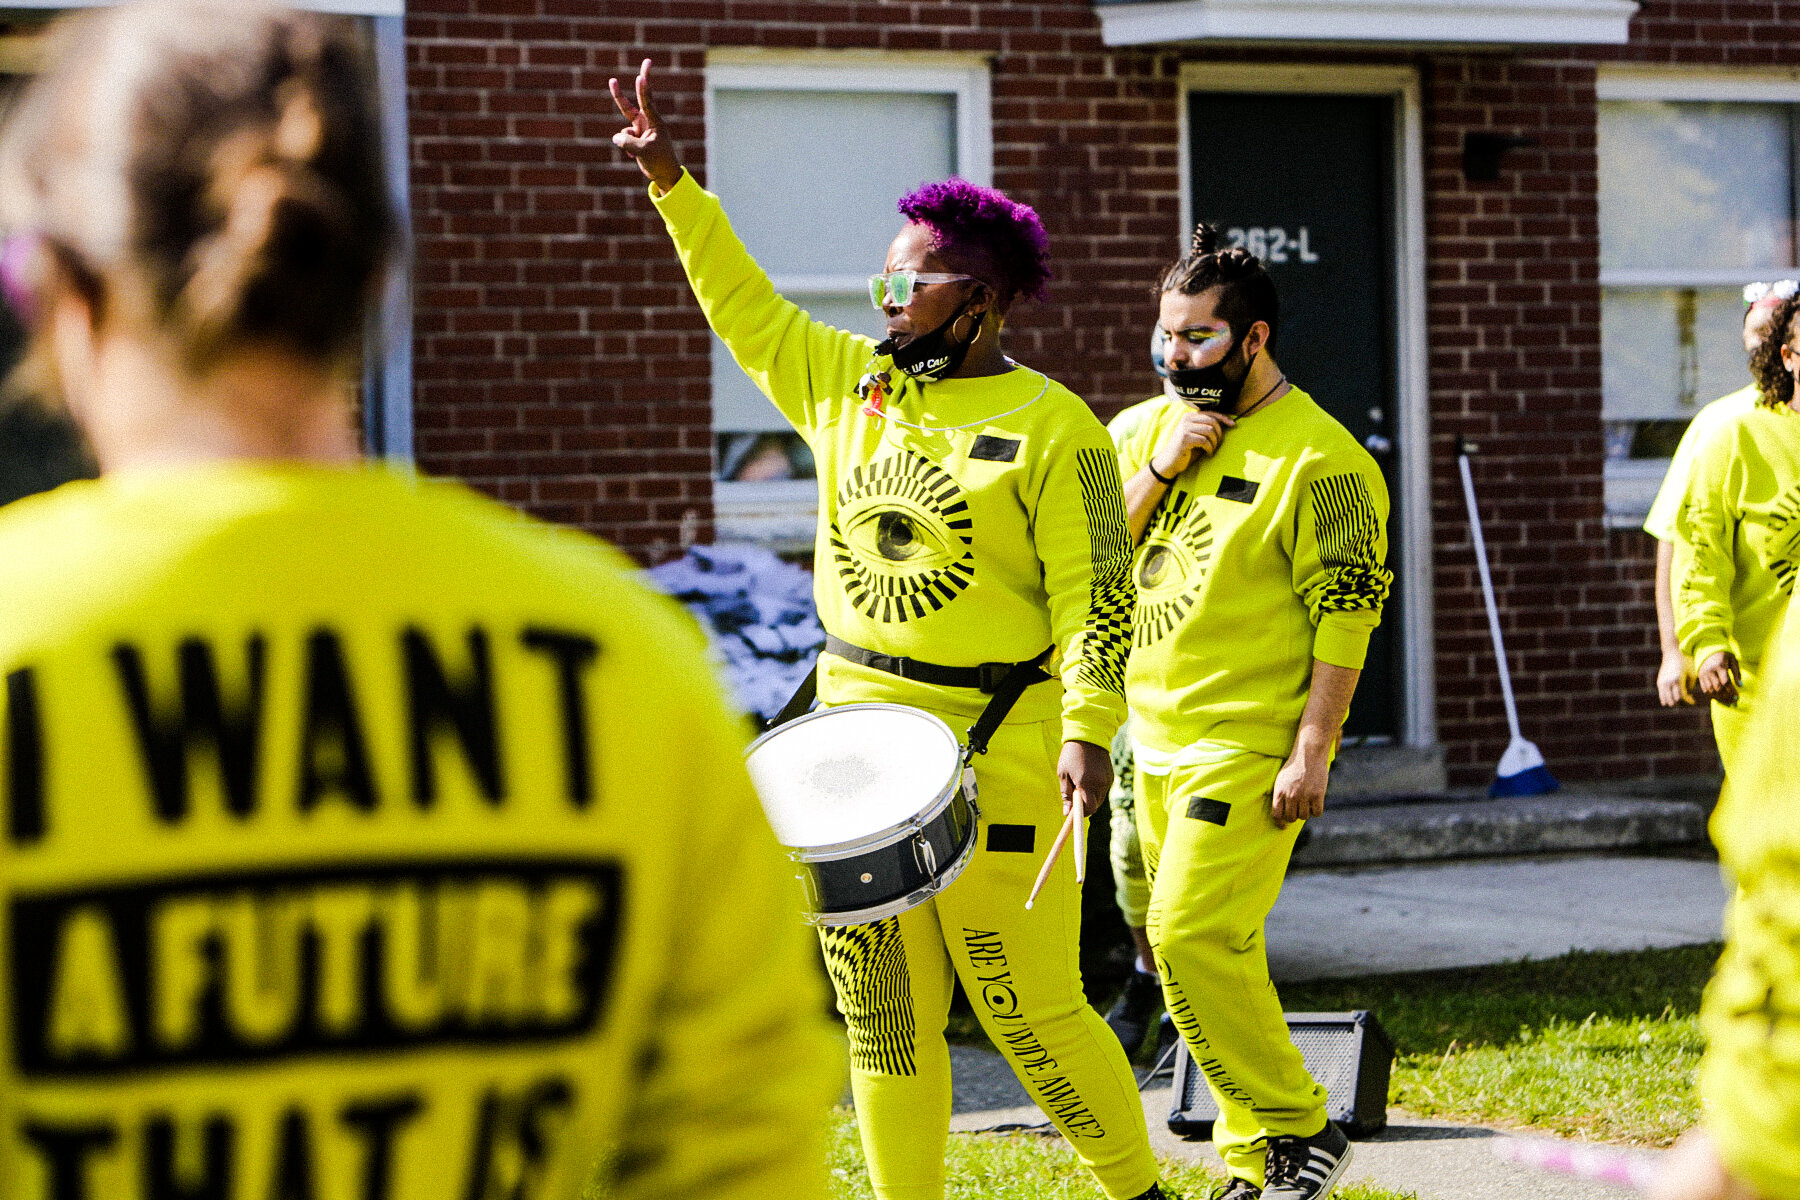 ClimateMarch_Pronk2020_Stephanie_Ewens_Photography_Clam_Jam_Brass_Band_Lady_J_The_Glitter_Goddess_Collective_Haus_of_Glitter_Dance Company-14.jpg